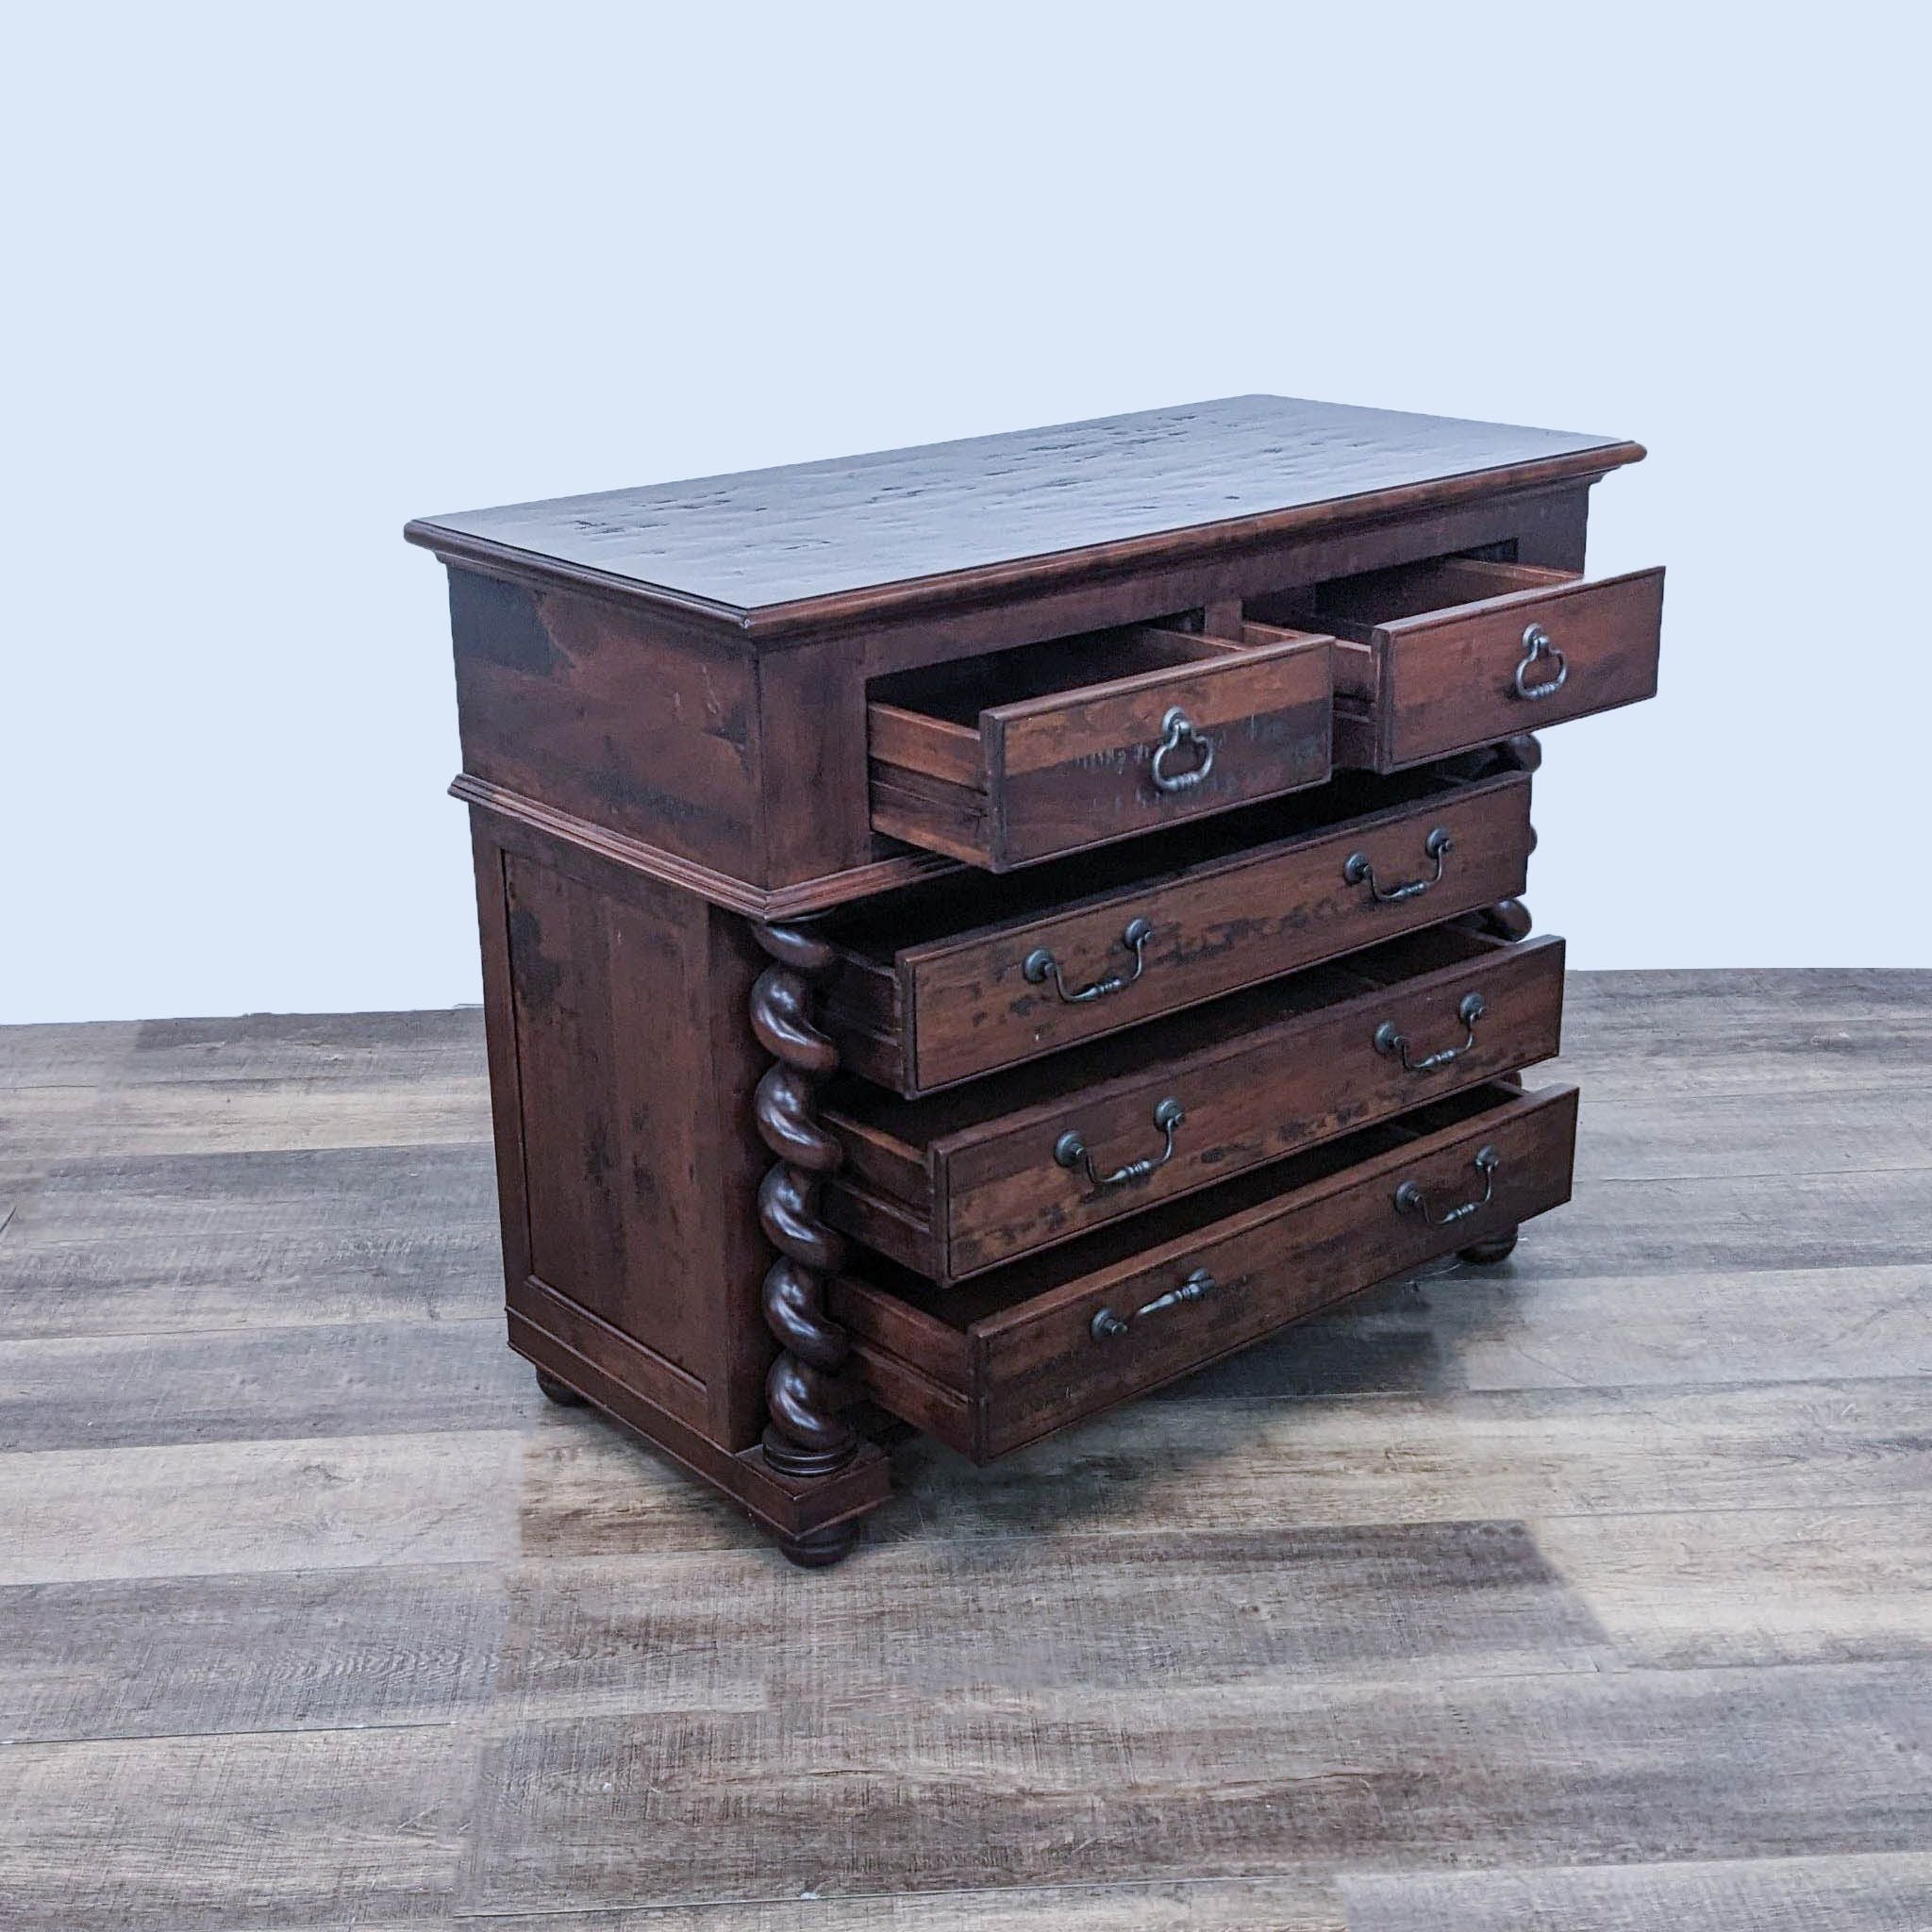 Alt text 2: Open view of a dark wood Reperch dresser showcasing Barley Twist detailing and five partially open drawers.